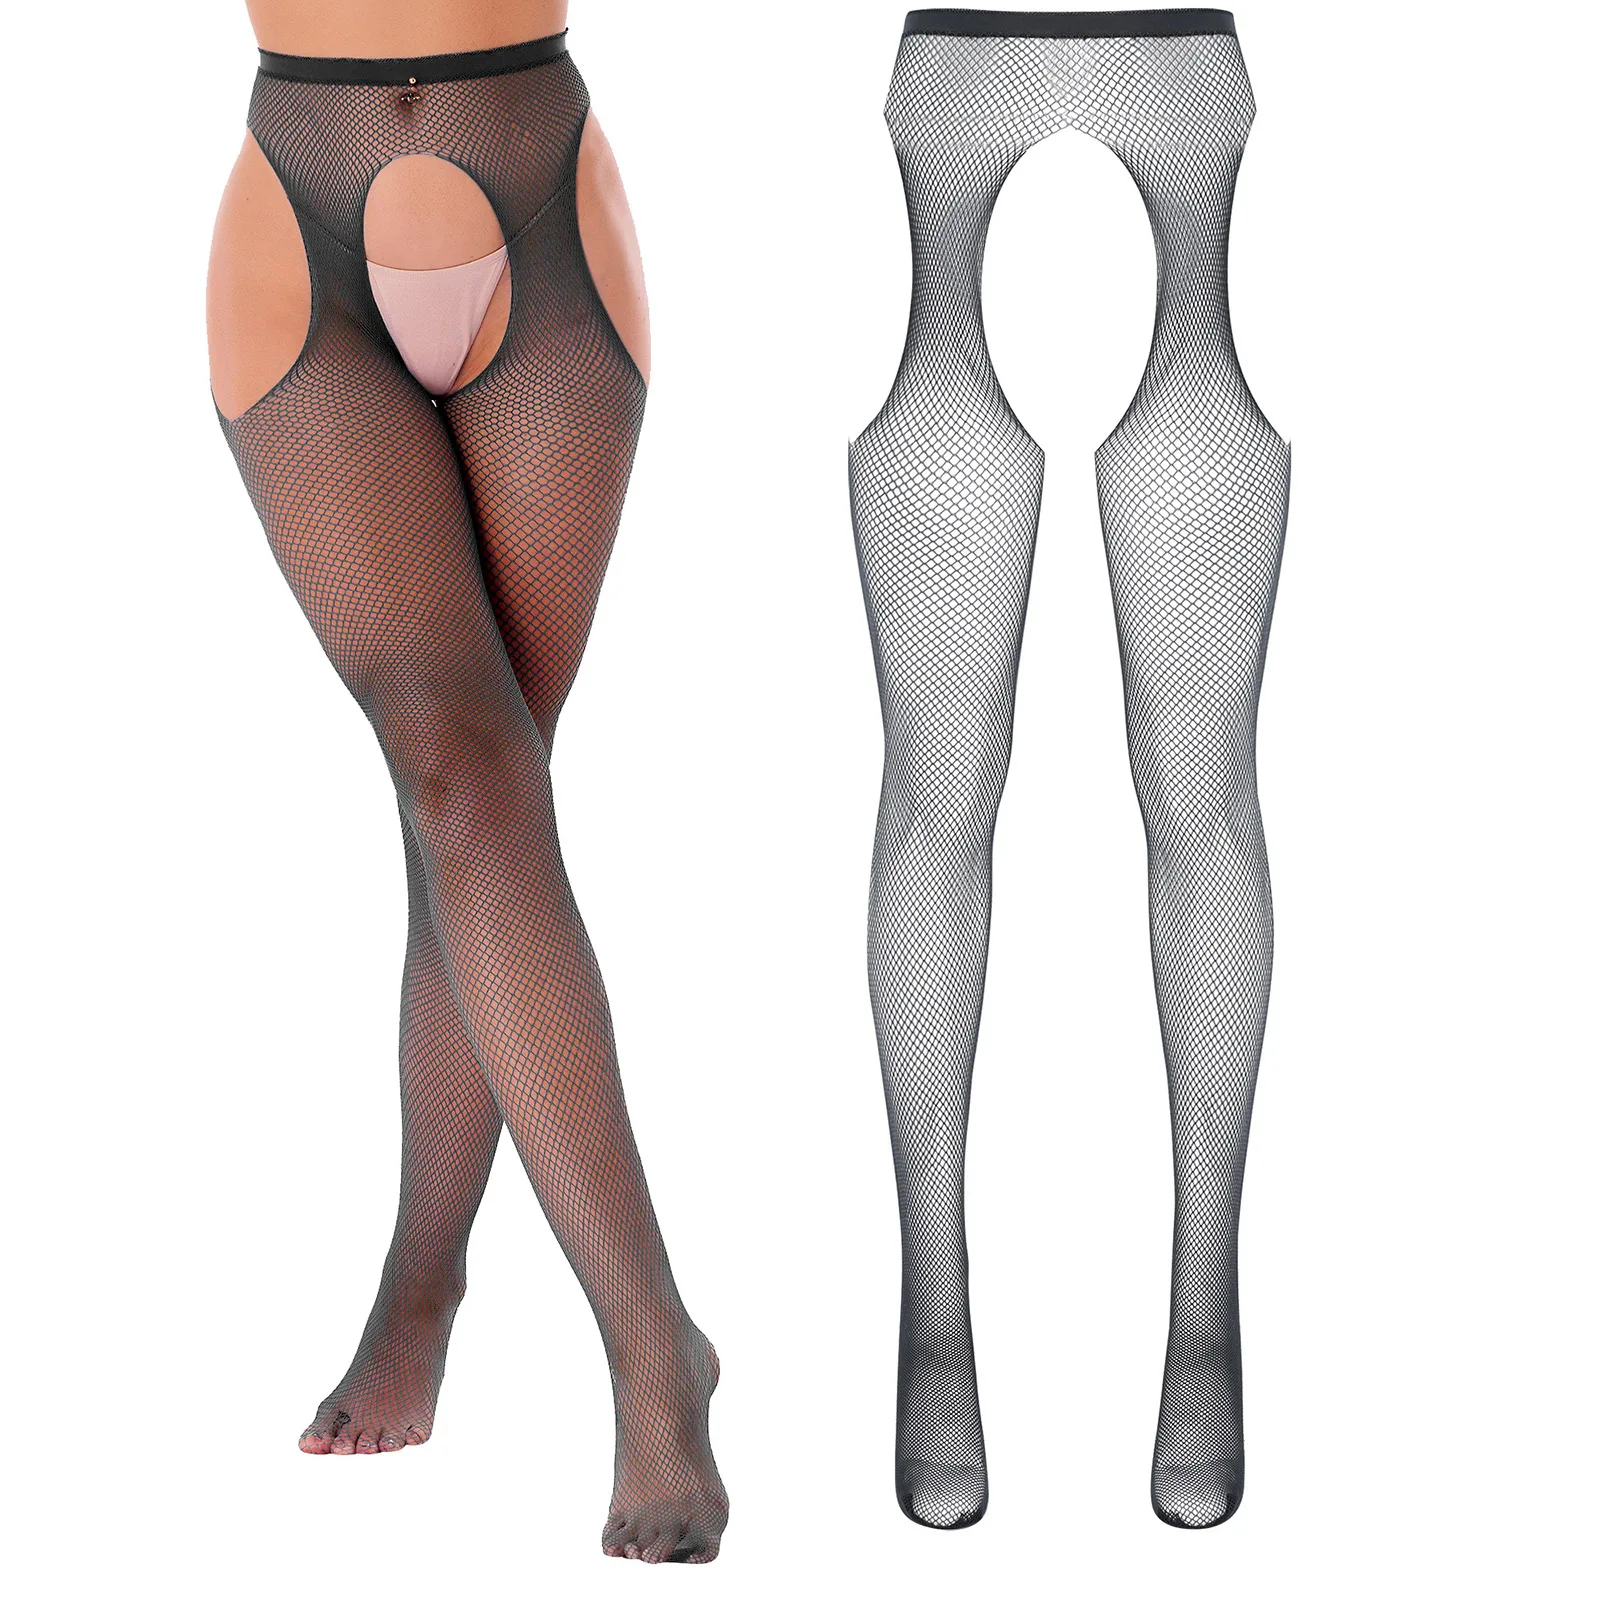 Womens Sexy Open Crotch Pantyhose Stockings Hollow Out Mid Waist Elastic Cutout Crotchless Leggings Underwear Erotic Lingerie erotic lingerie open crotch halter three point bra panty suit hollow temptation flirting porno underwear passion sexy lingerie